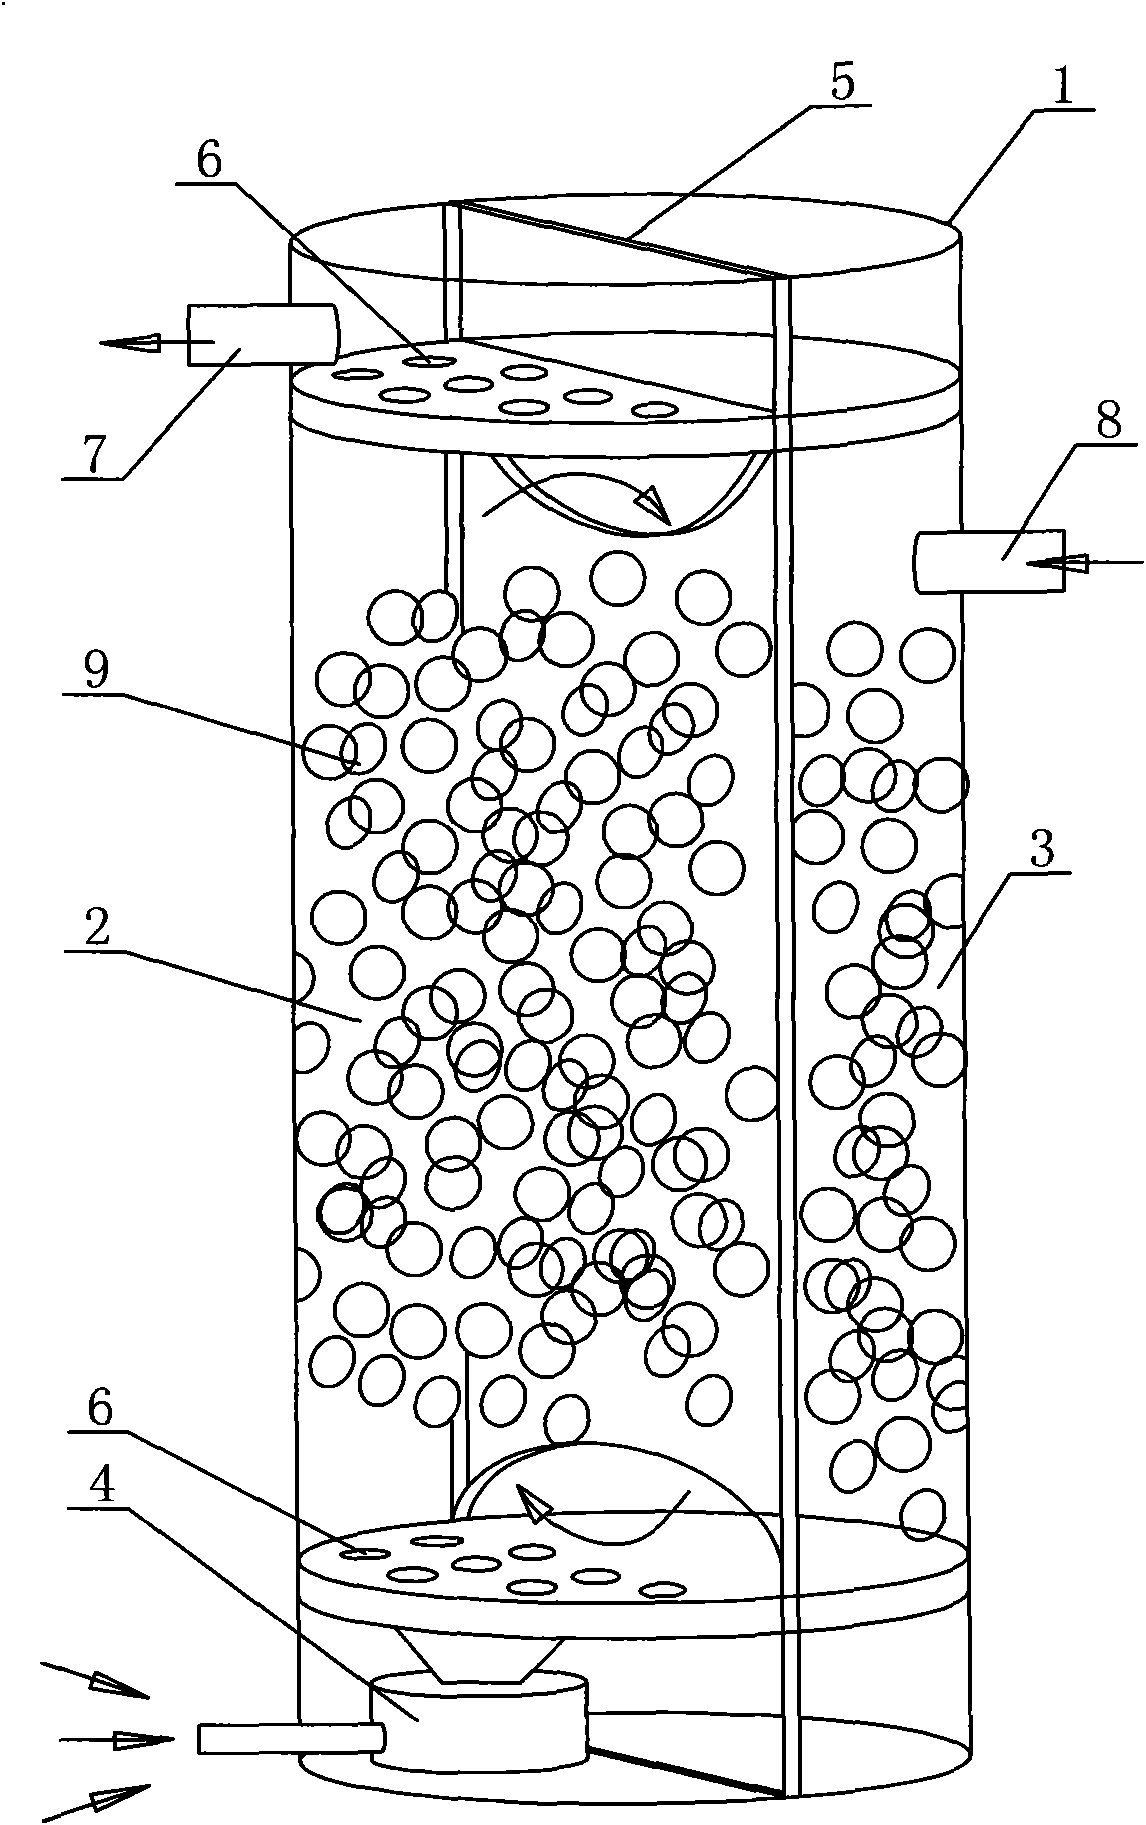 Biological sewage treatment equipment and process of internal recycle suspension padding